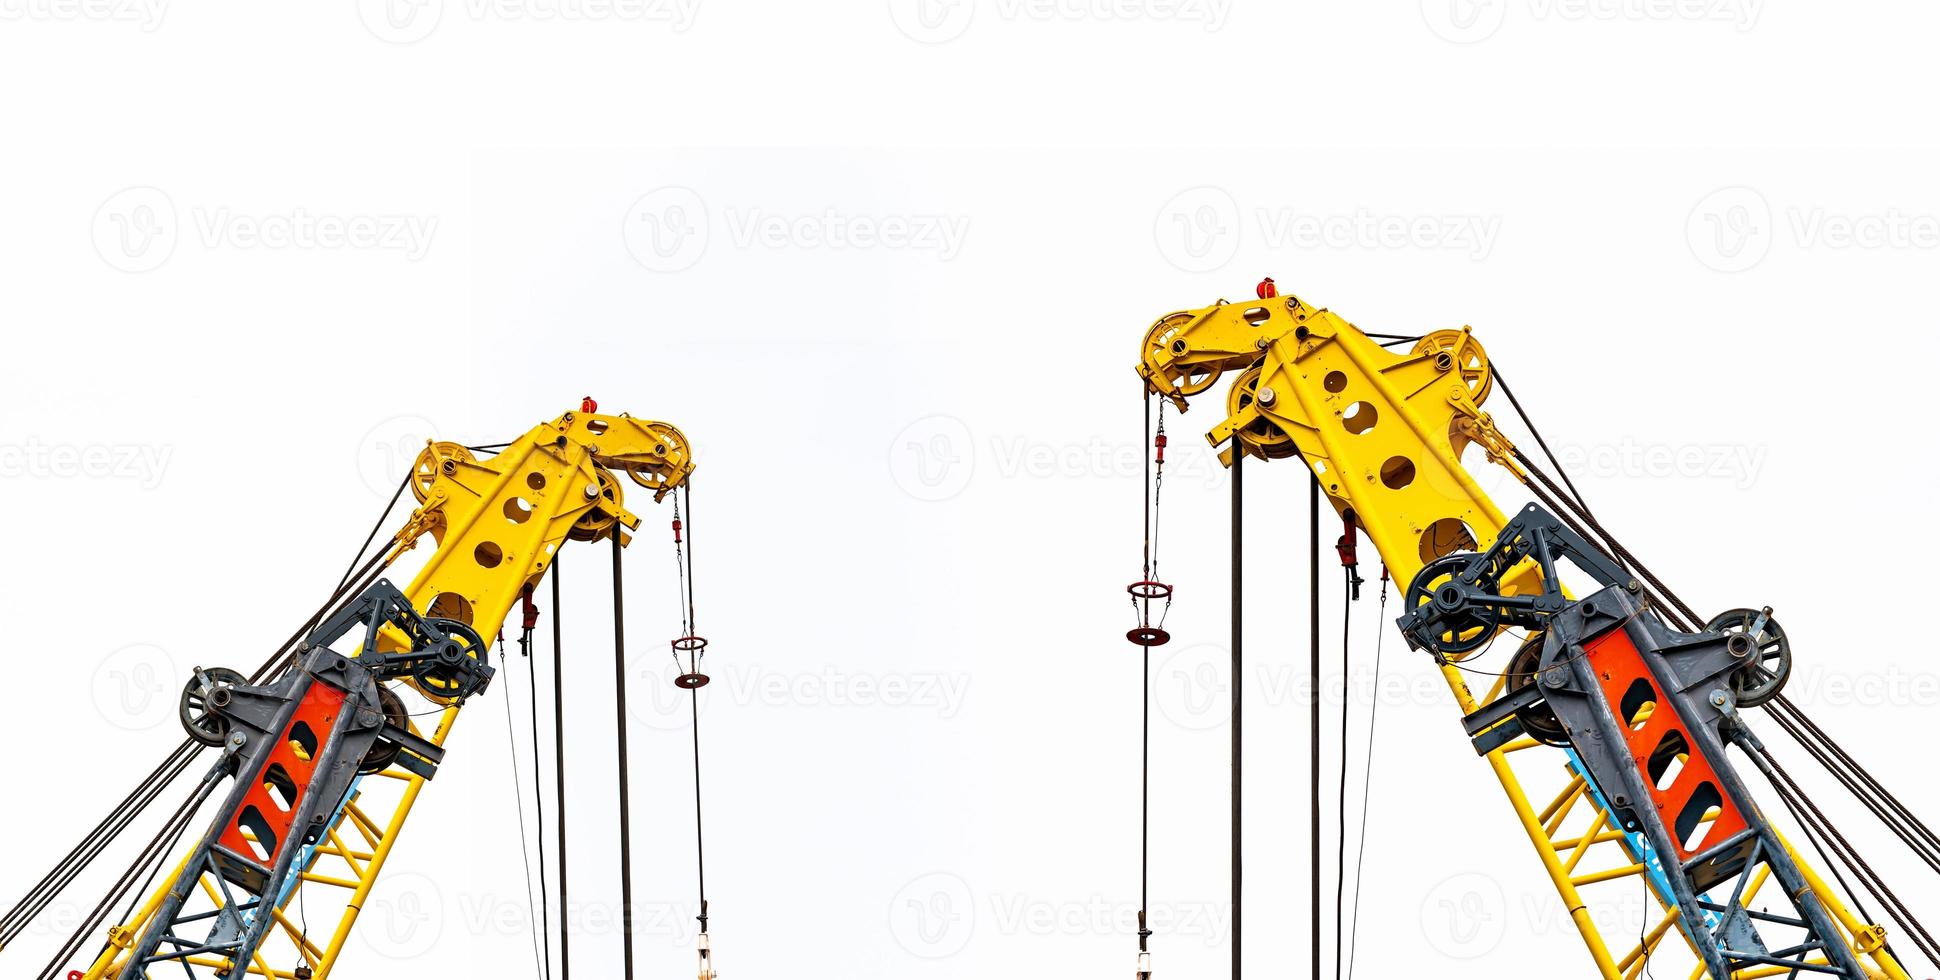 Big yellow construction crane for heavy lifting isolated on white background. Construction industry. crane for container lift or at construction site. Crane rental business concept. Crane dealership. photo